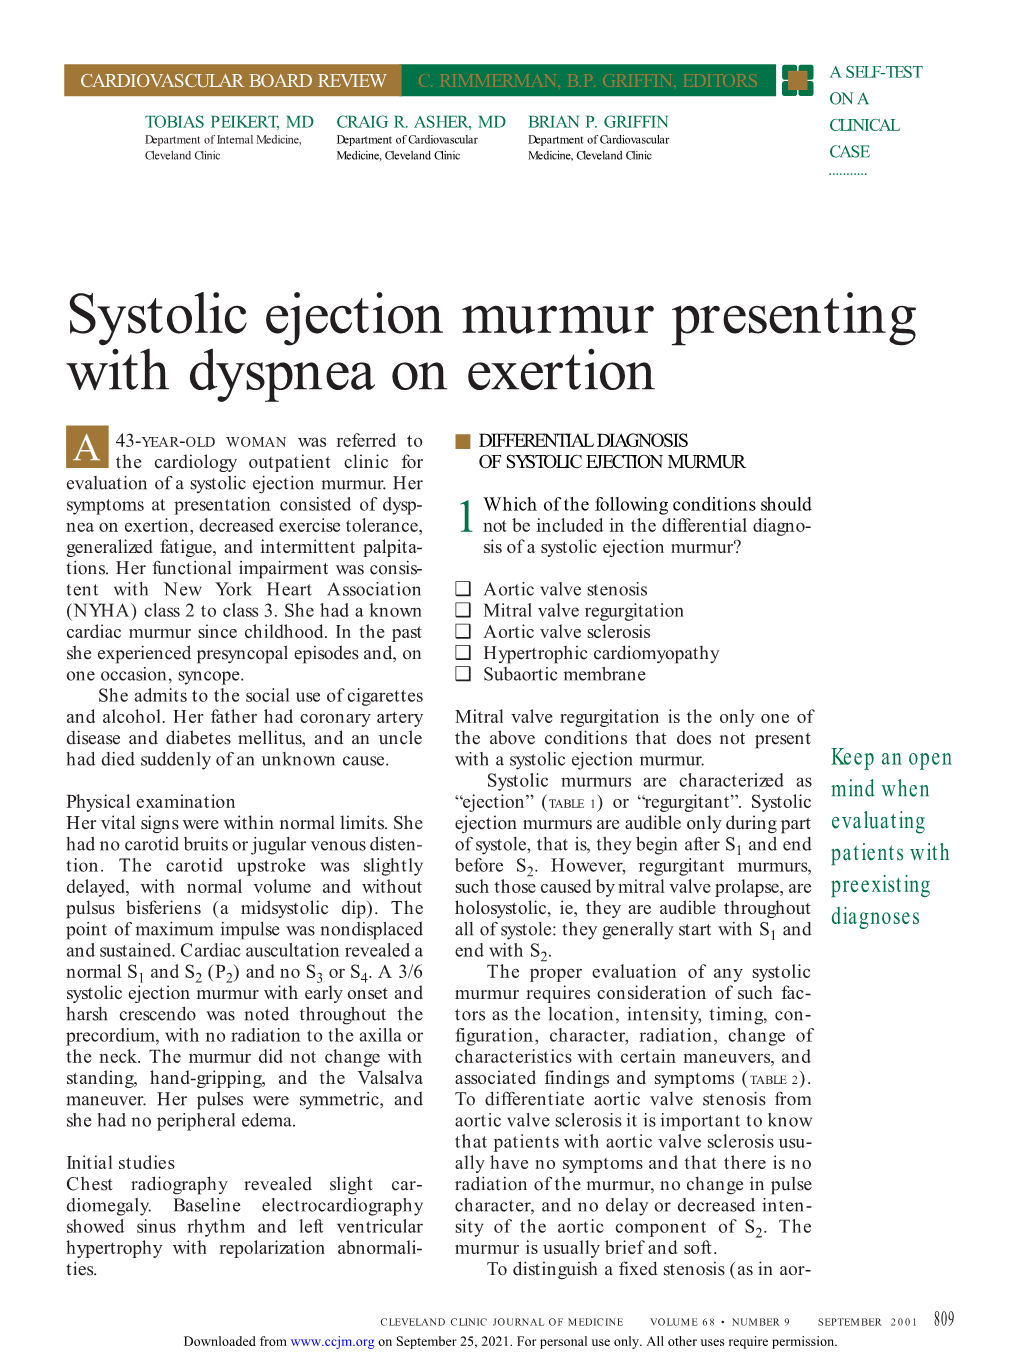 Systolic Ejection Murmur Presenting with Dyspnea on Exertion